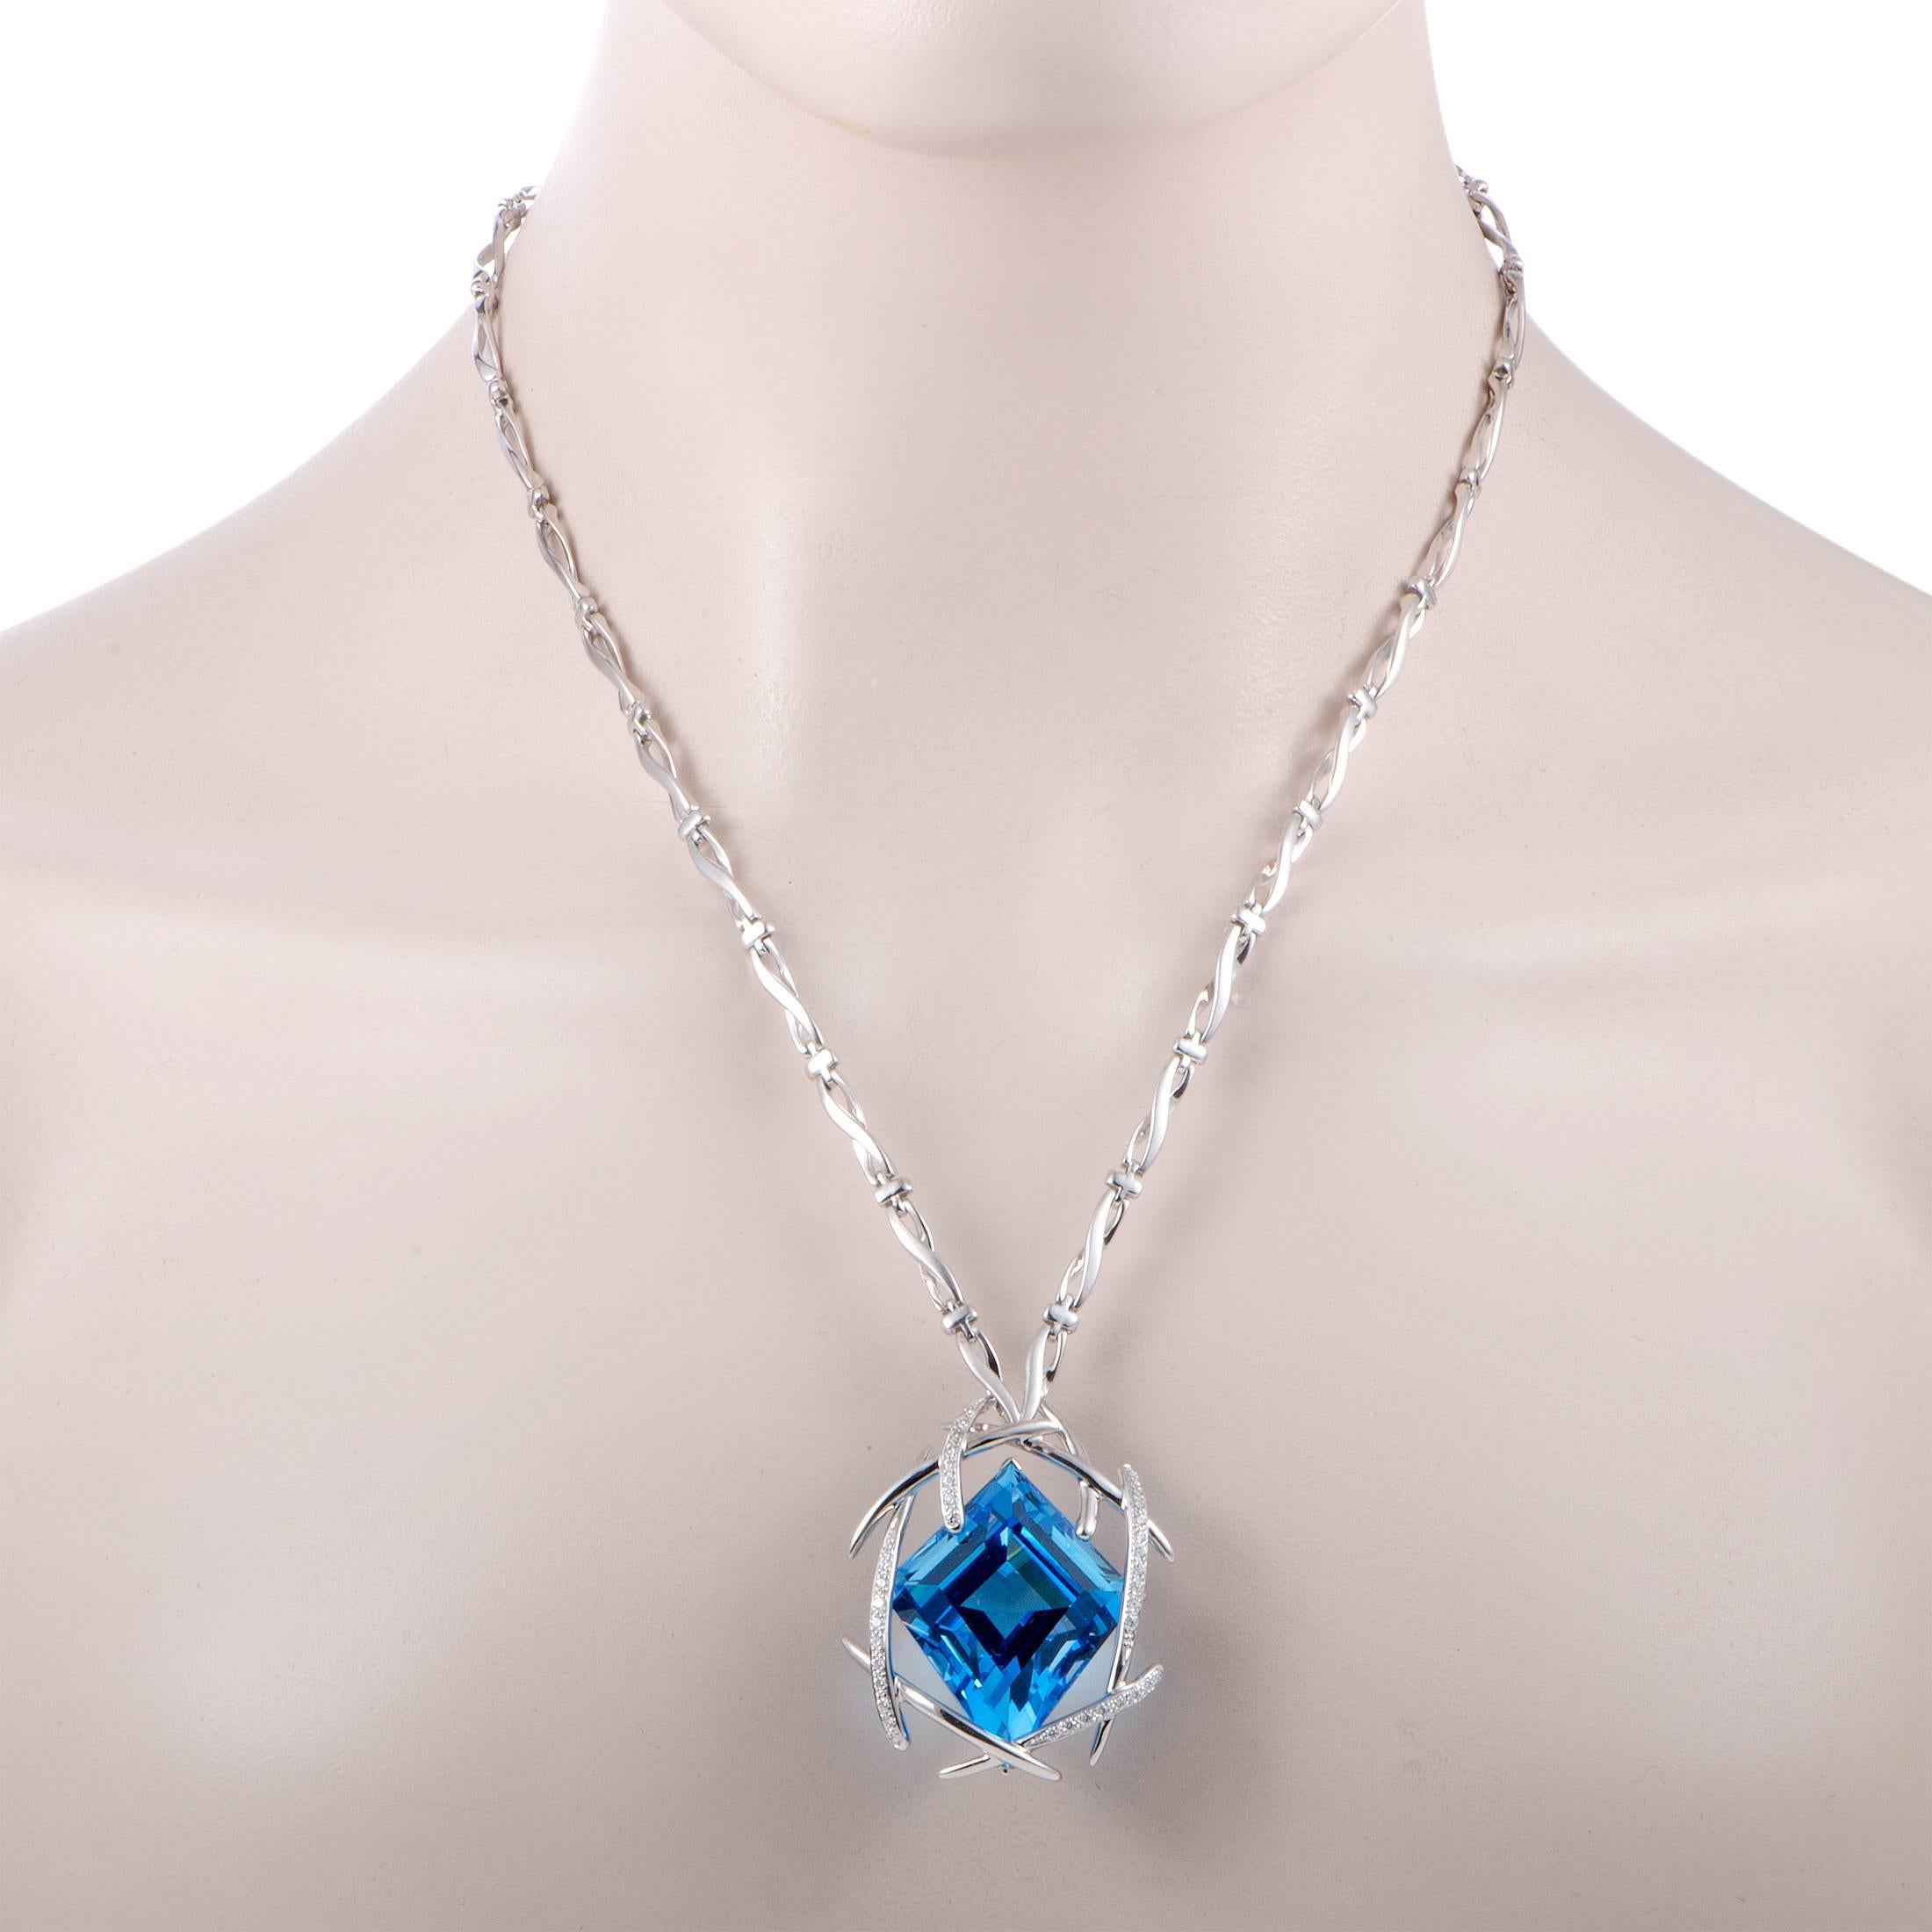 The majestic topaz steals the show in this fabulous necklace, compelling with its exquisite cut and enticing color. The topaz weighs astounding 90.80 carats and it is beautifully accentuated by glistening diamonds that amount to 0.70 carats. The